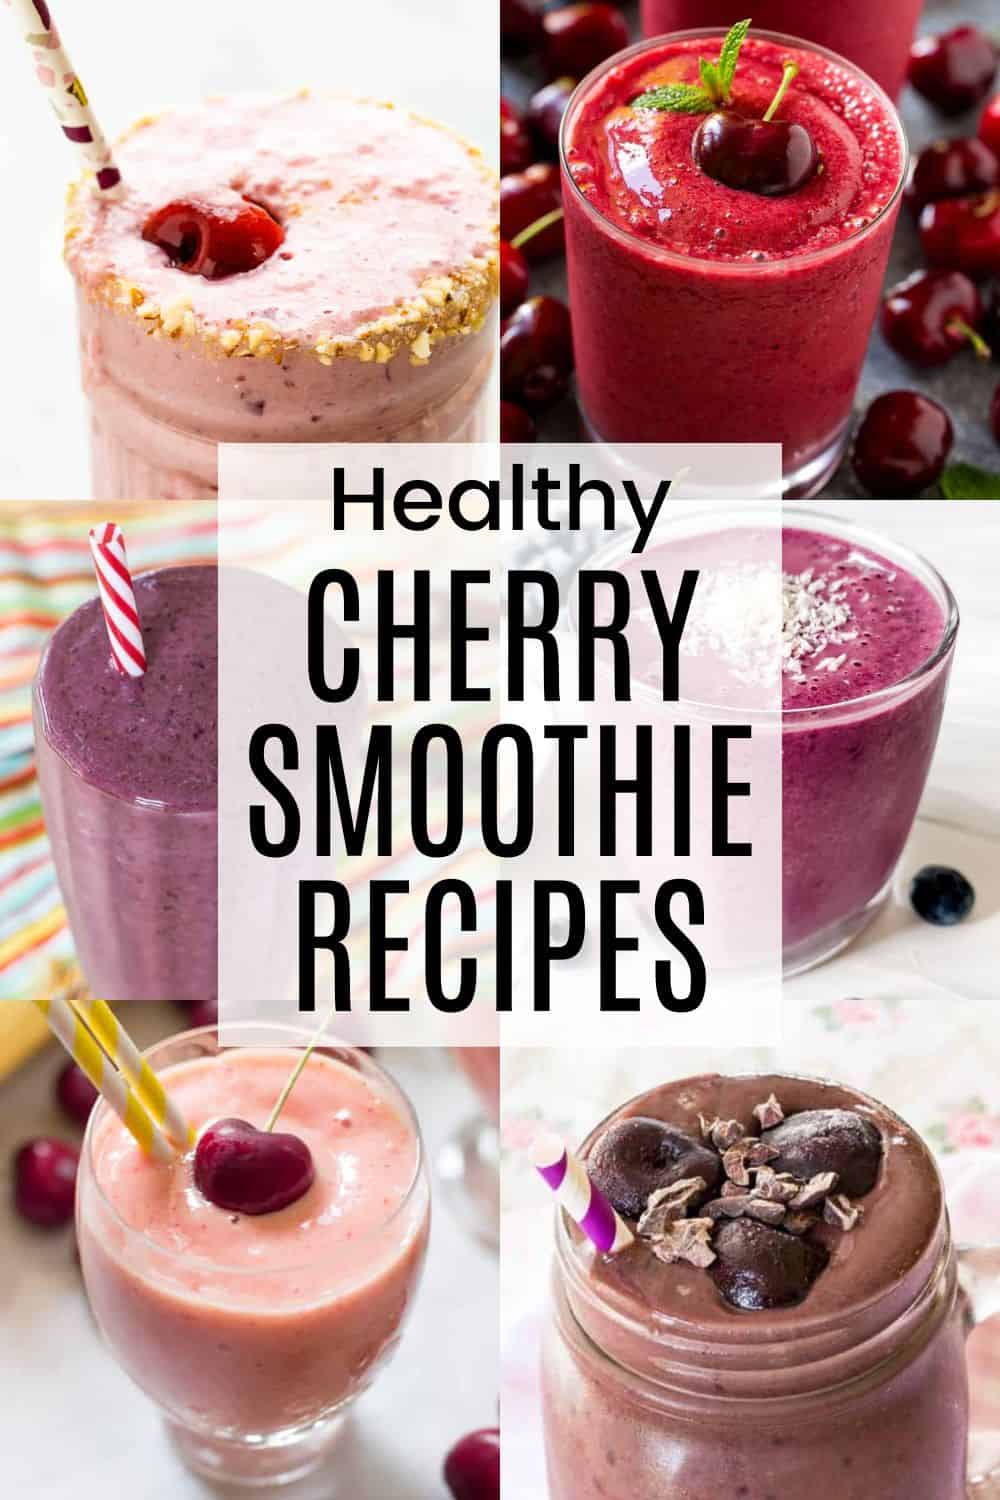 A two-by-three collage of various cherry smoothies with a translucent white box in the middle with text overlay that says "Healthy Cherry Smoothie Recipes"